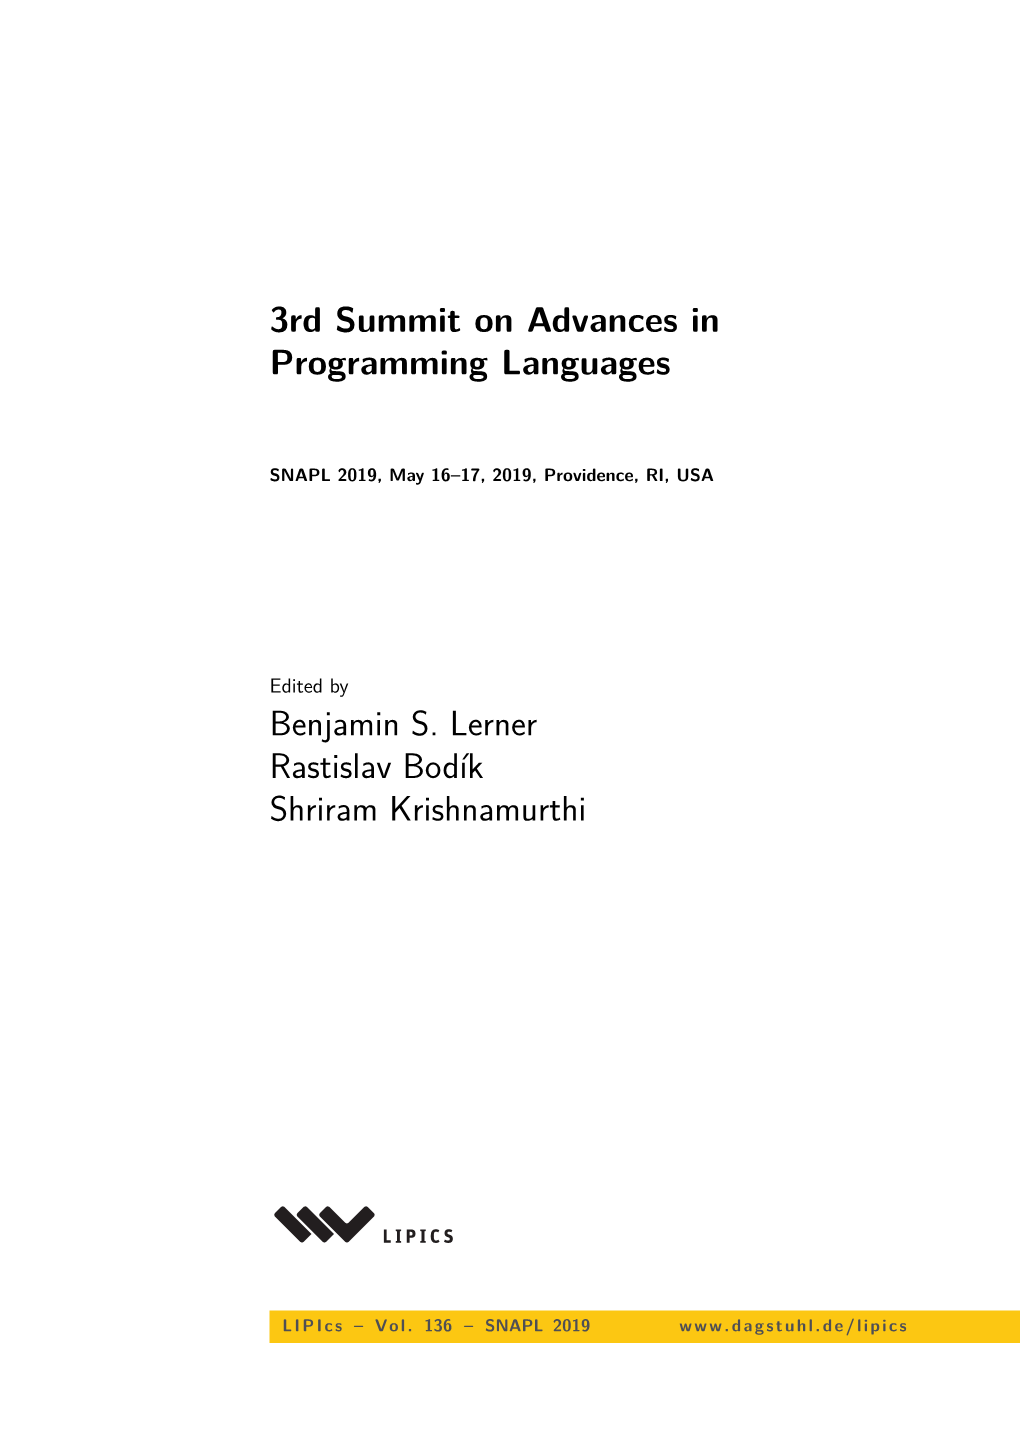 3Rd Summit on Advances in Programming Languages (SNAPL 2019)